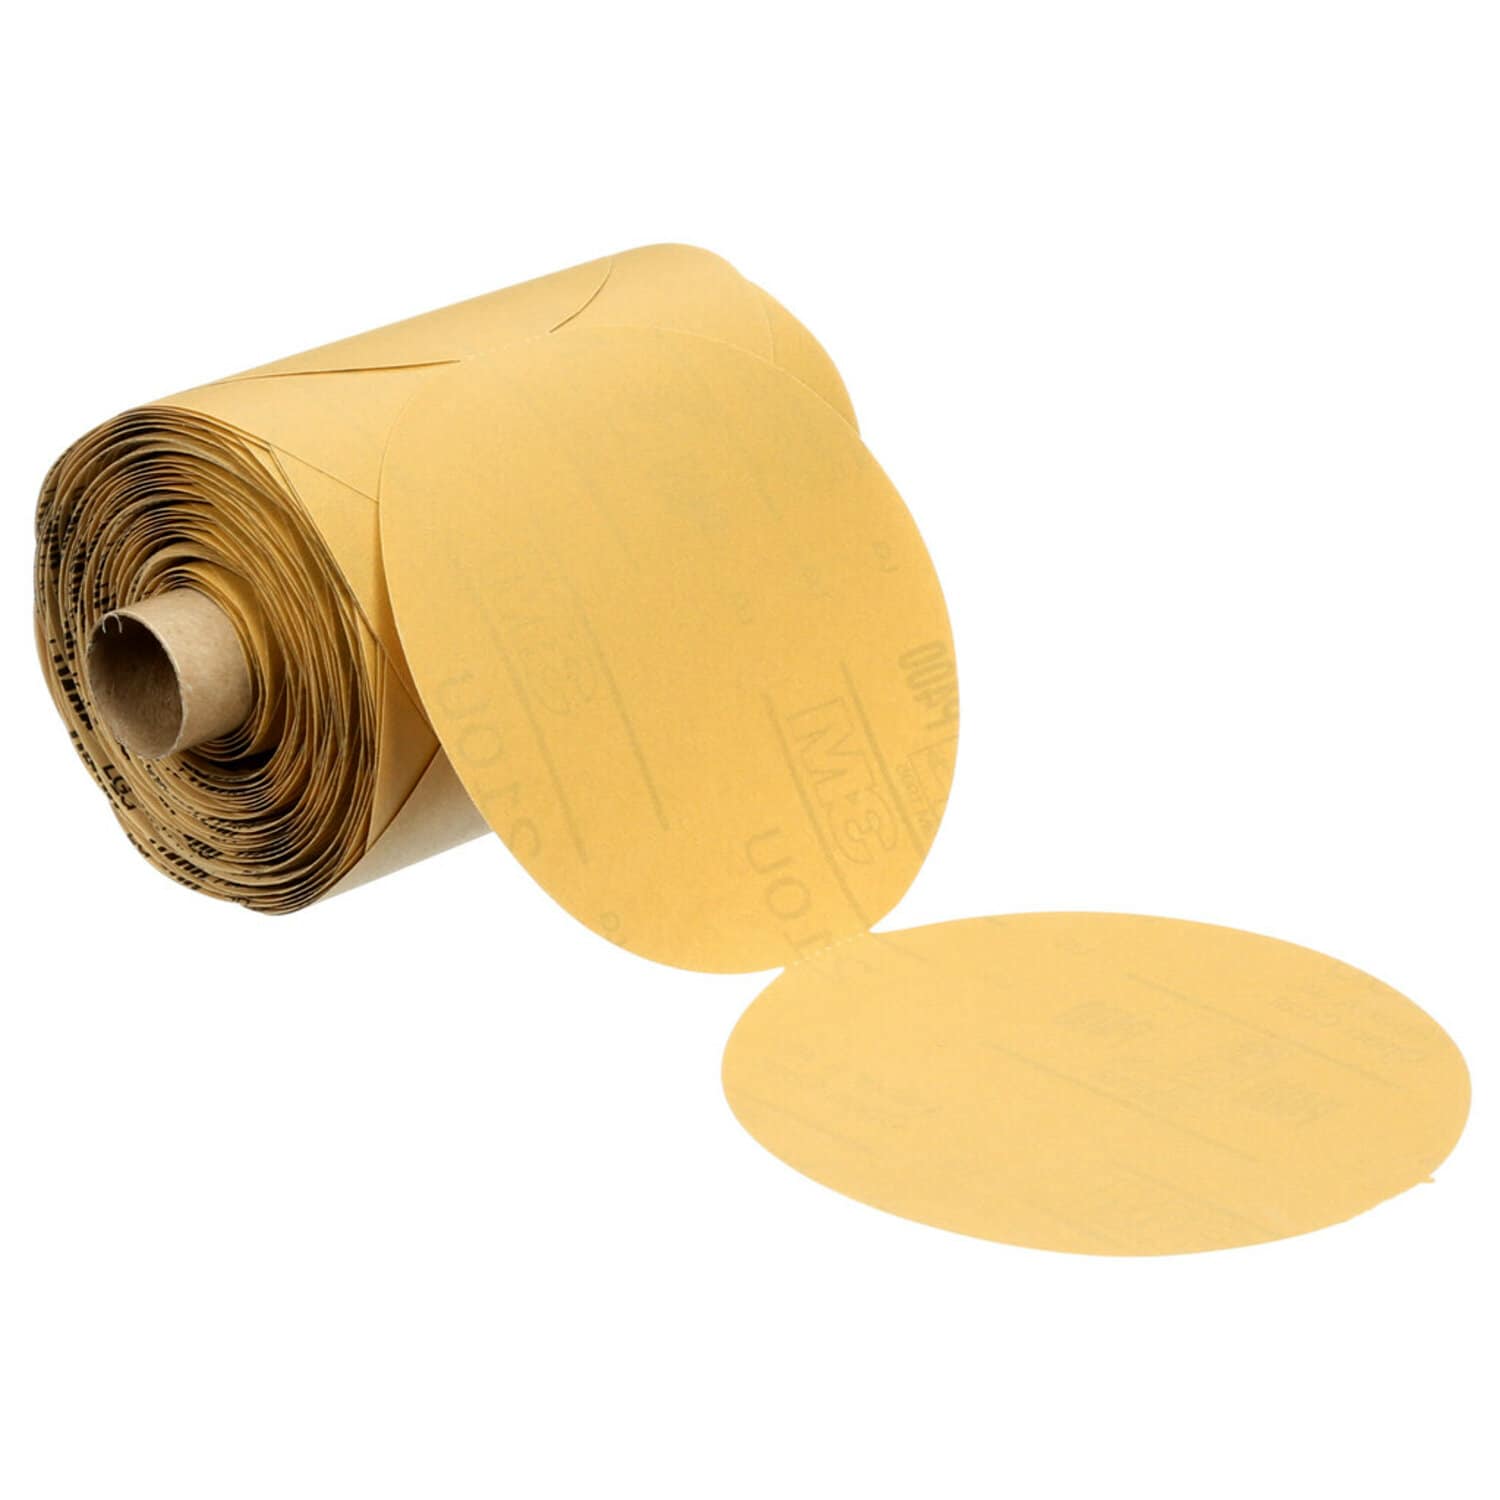 7000118115 - 3M Stikit Paper Disc Roll 210U, P320 A-weight, 5 in x NH, Linered, Die 500X, 250 Discs/Roll, 4 Rolls/Case